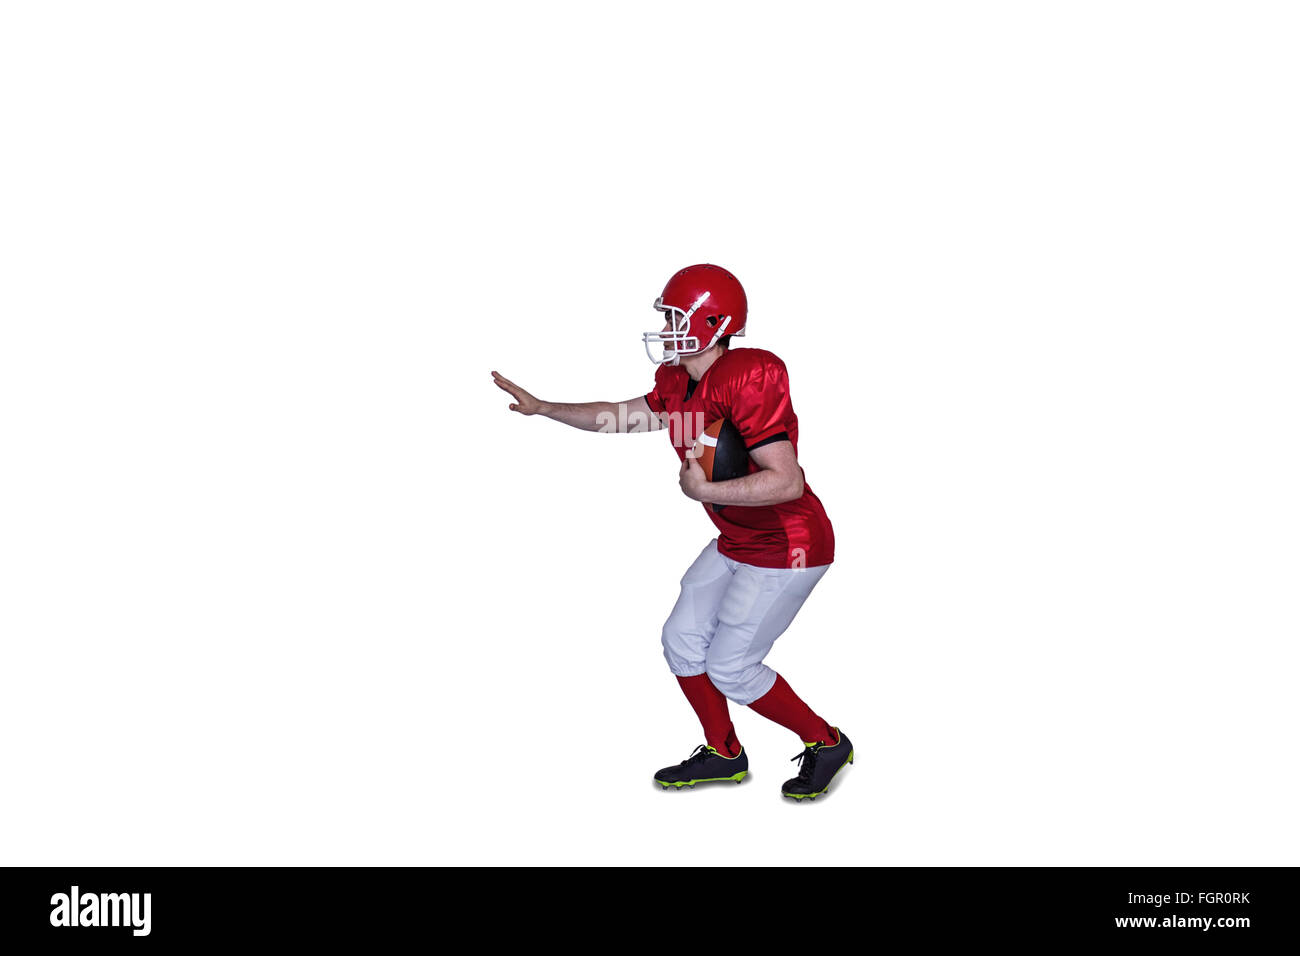 American football player running with the ball Stock Photo